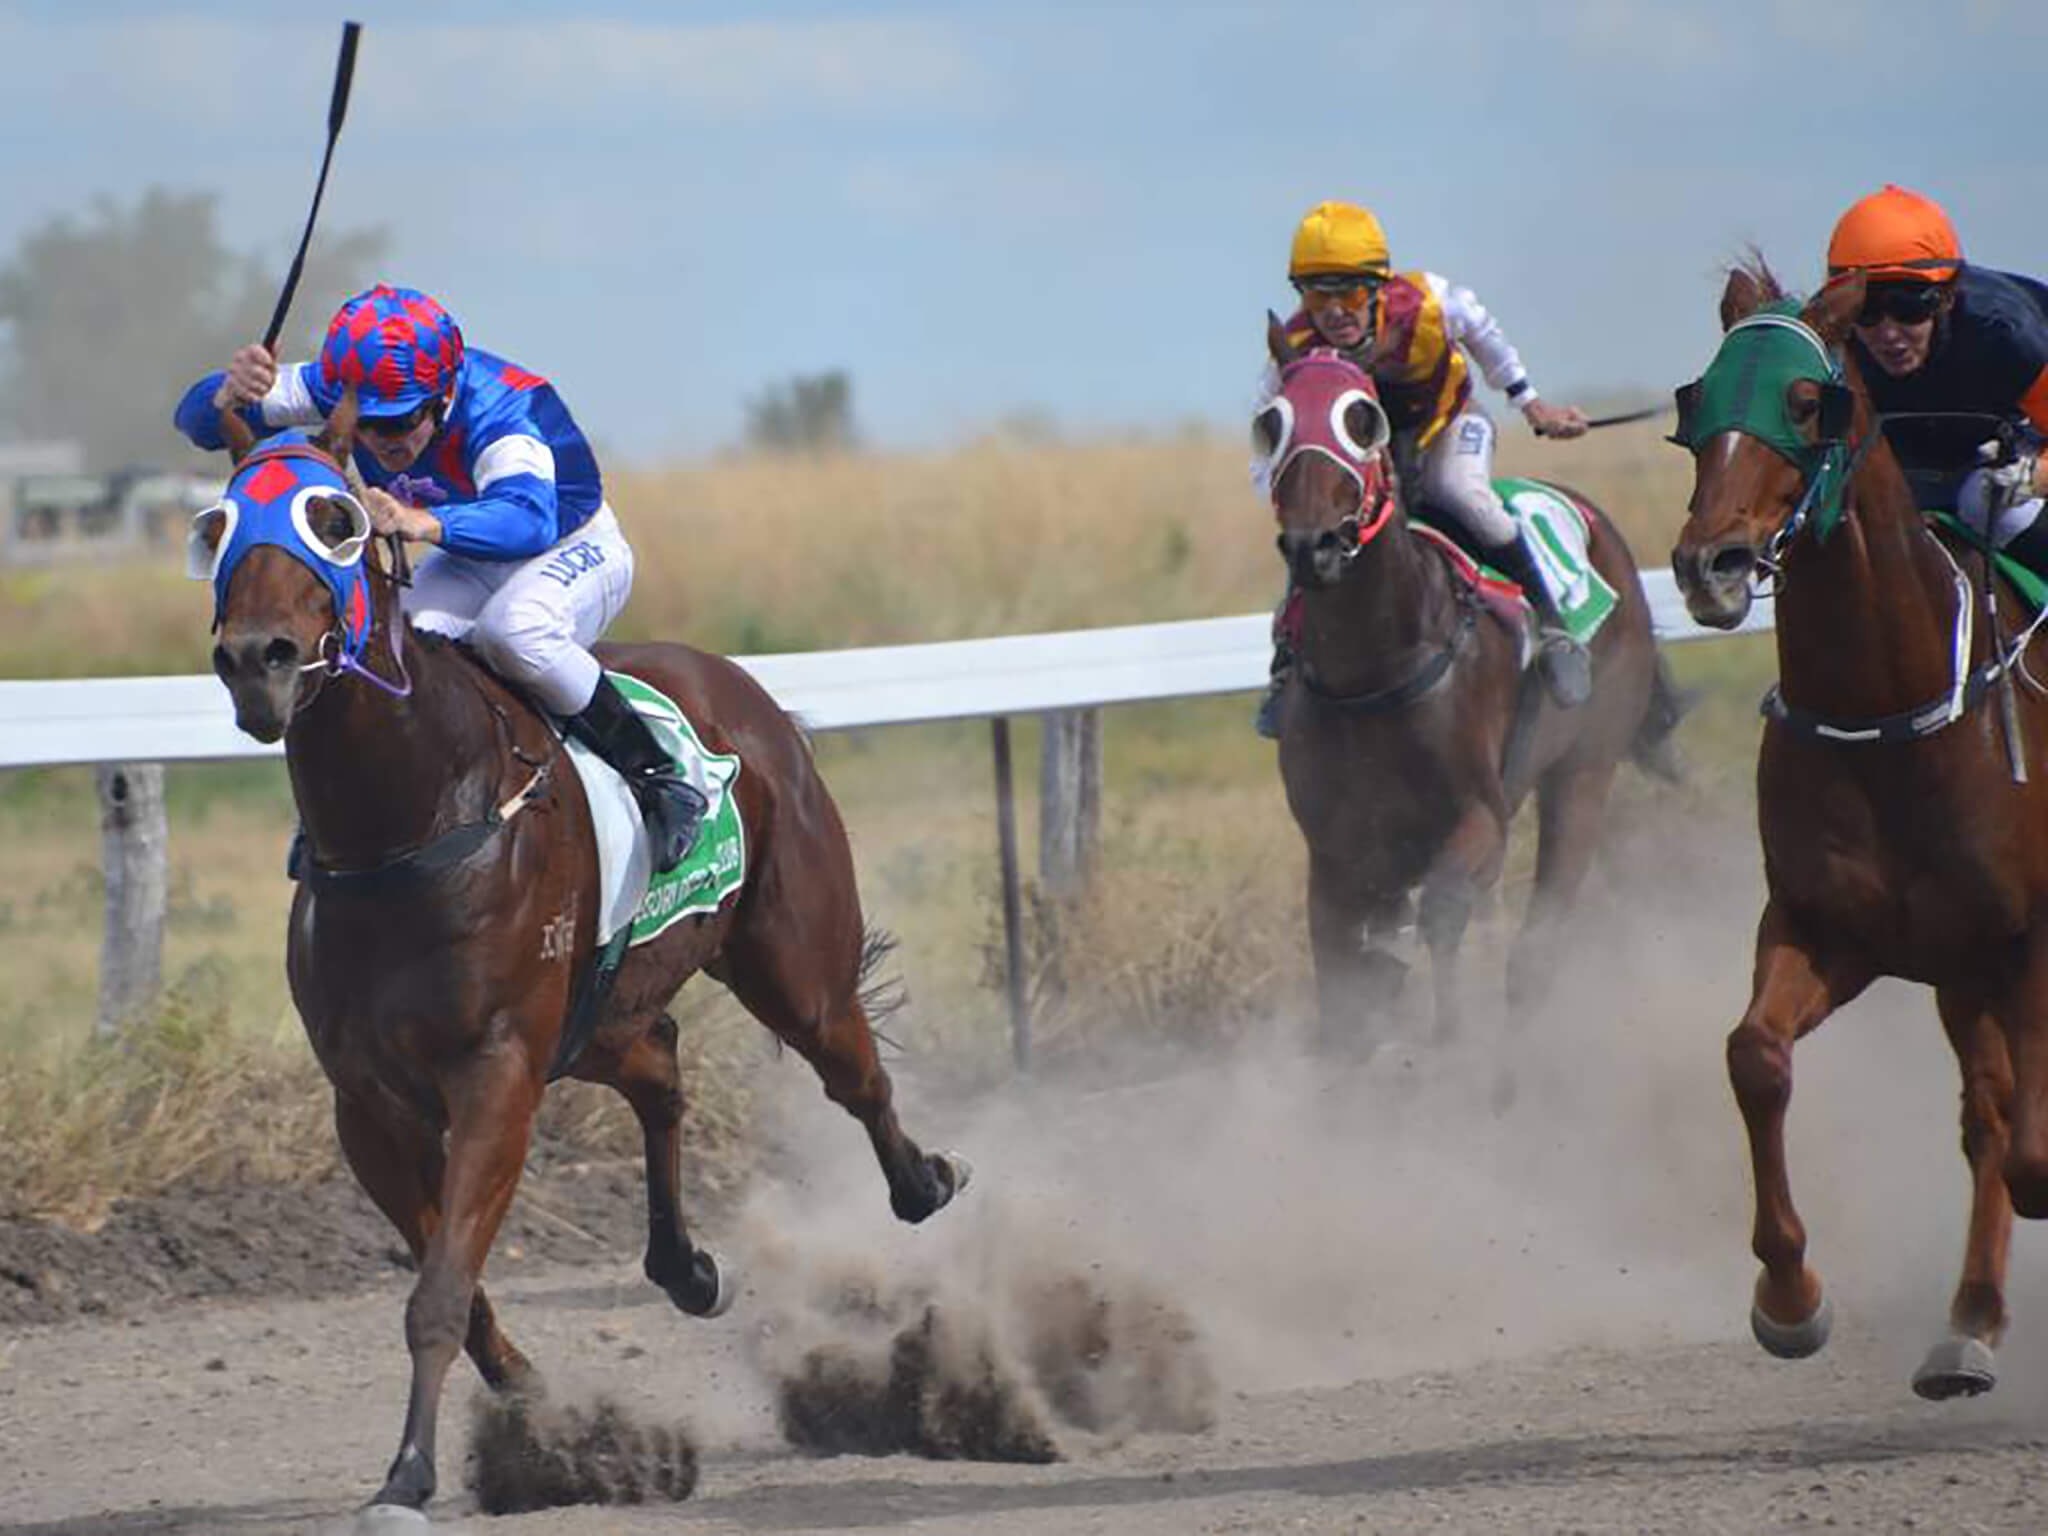 Racing action at Gregory Downs